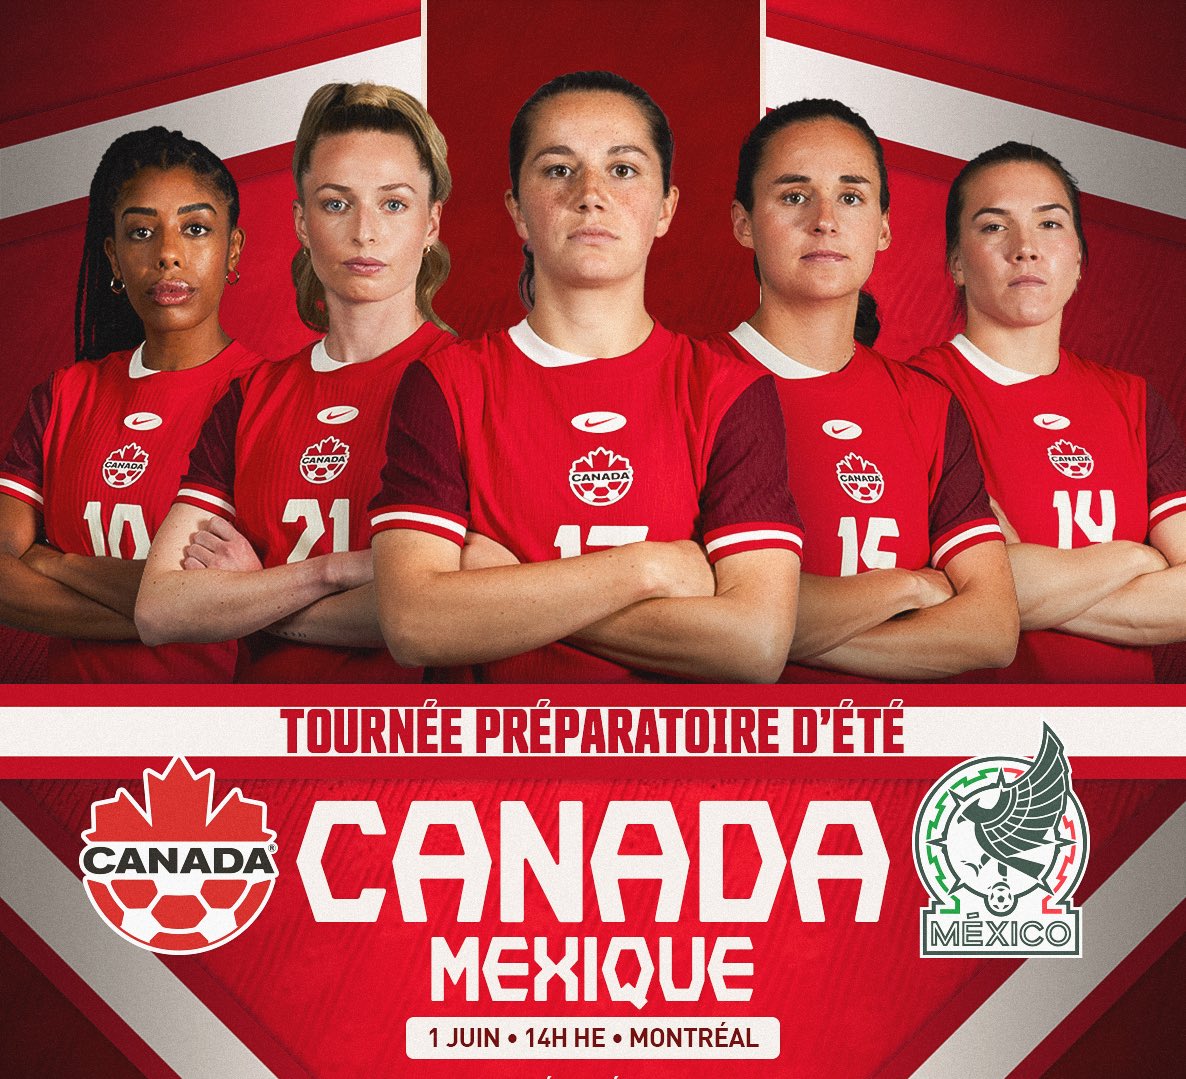 Nous serons au match Canada vs Mexique ce samedi au Stade Saputo! Procure-toi tes billets dès maintenant😀

We'll be at the Canada vs Mexico match this Saturday at Saputo Stadium! 
Get your tickets now 😀

🎟️: ow.ly/Xjlr50S0F79